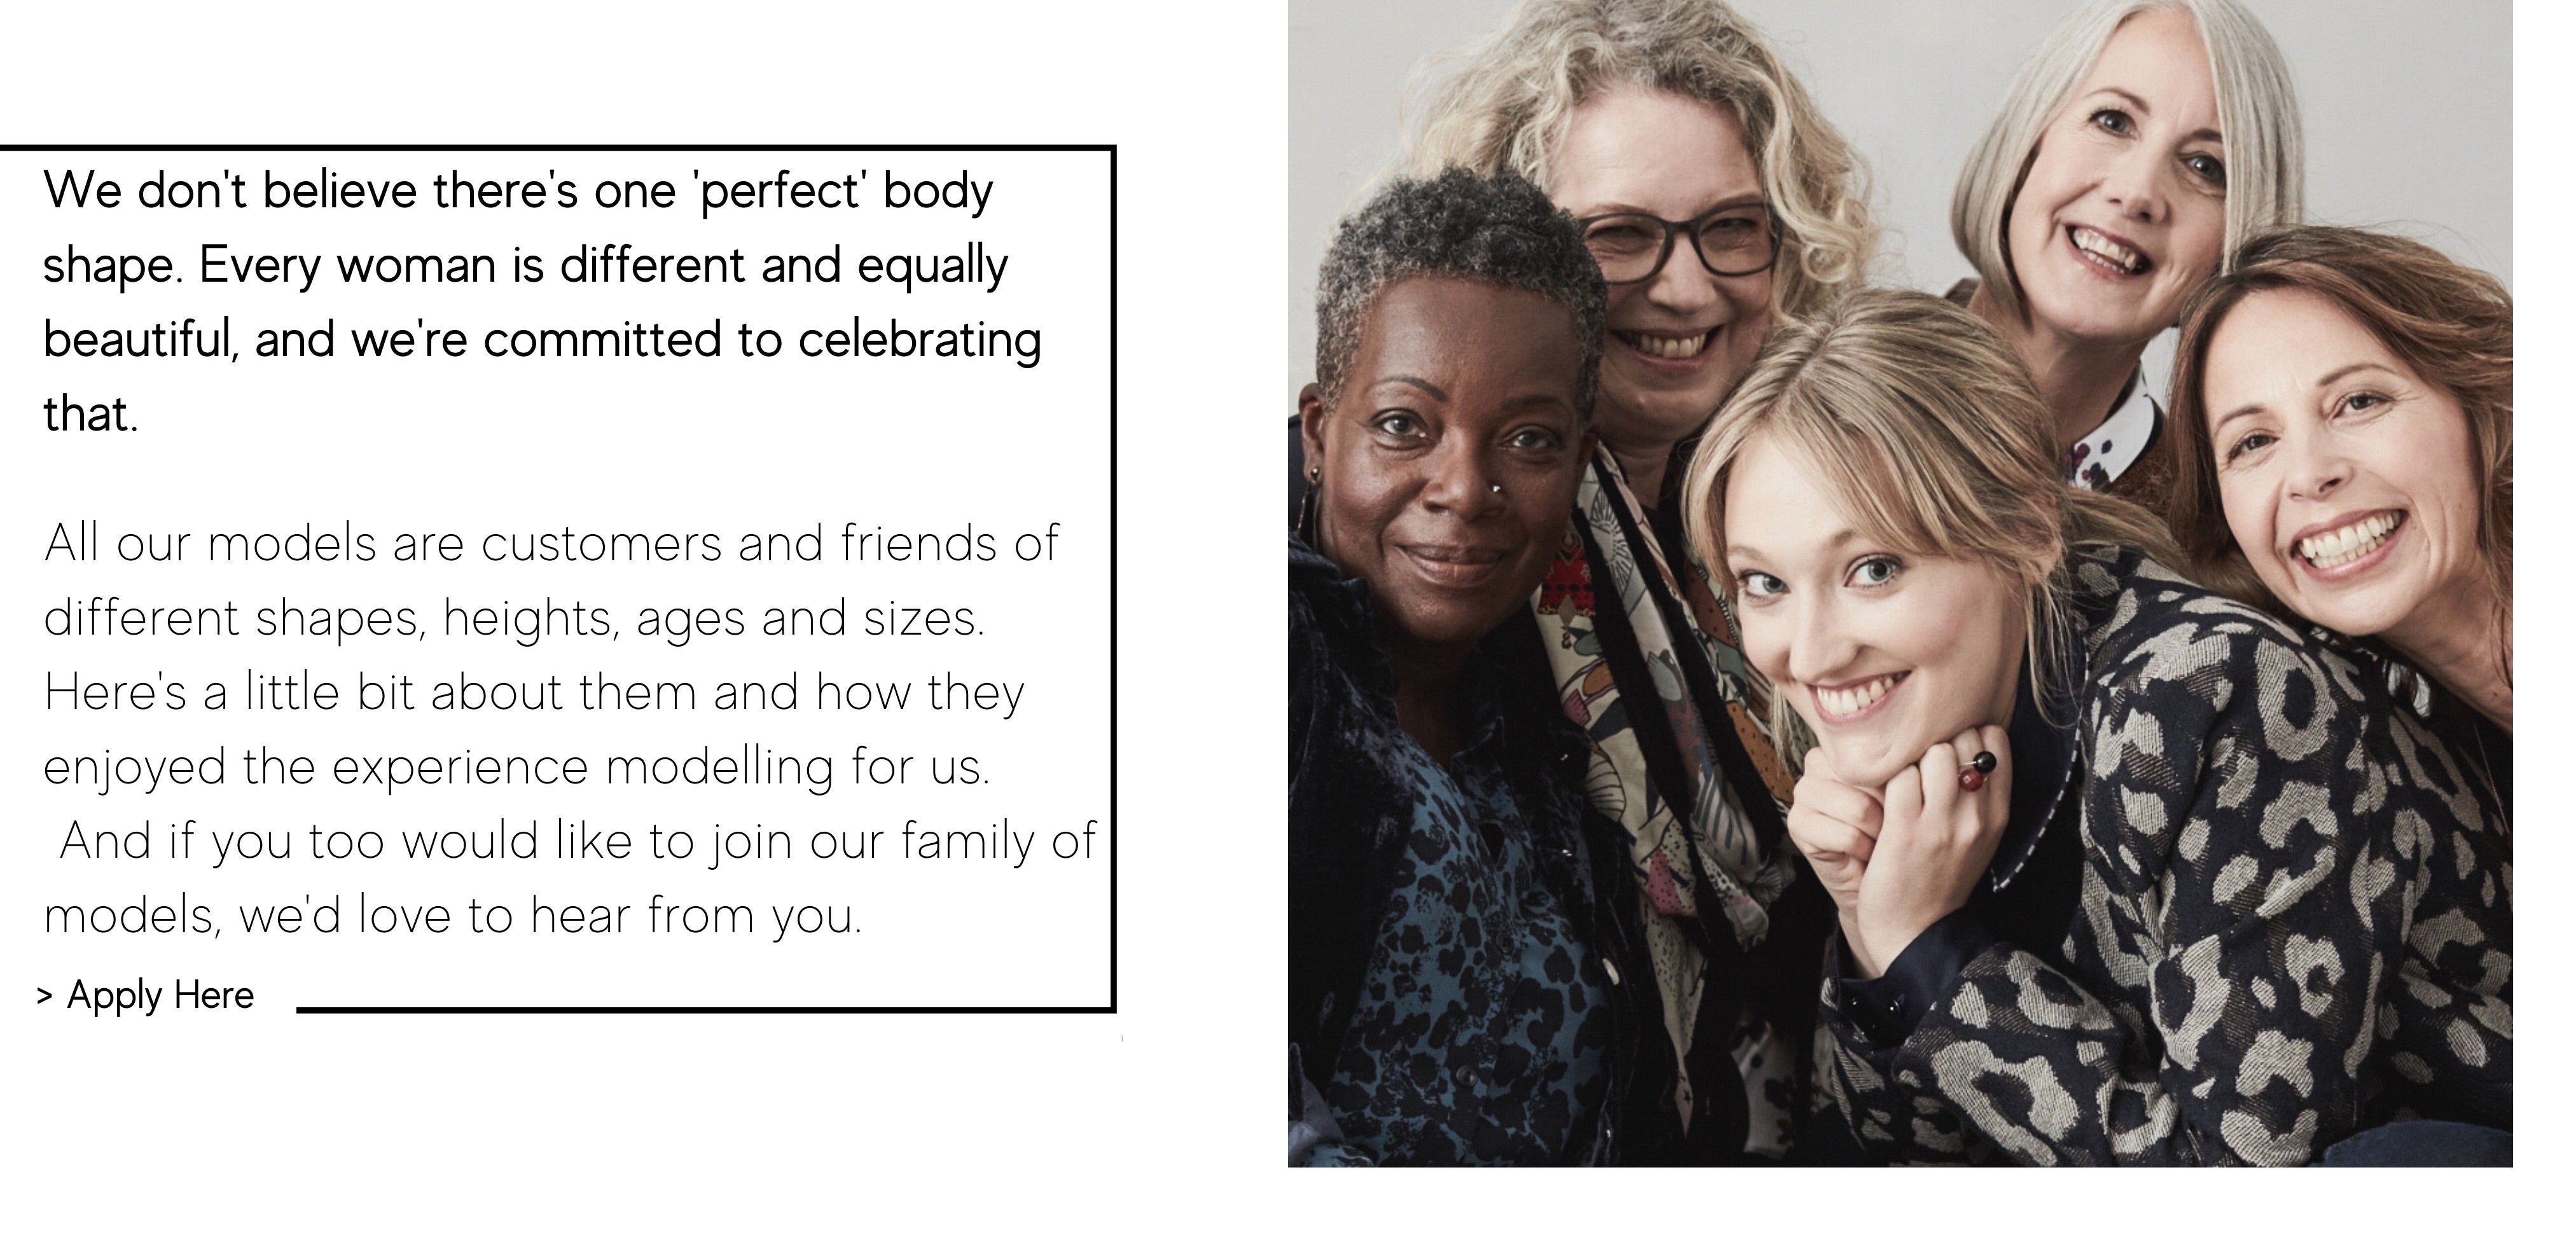 We don't believe there's one 'perfect' body shape. Every woman is different and equally beautiful, and we're committed to celebrating that.   All our models are customers and friends of different shapes, heights, ages and sizes.  Here's a little bit about them and how they enjoyed the experience modelling for us.  And if you too would like to join our family of models, we'd love to hear from you. 